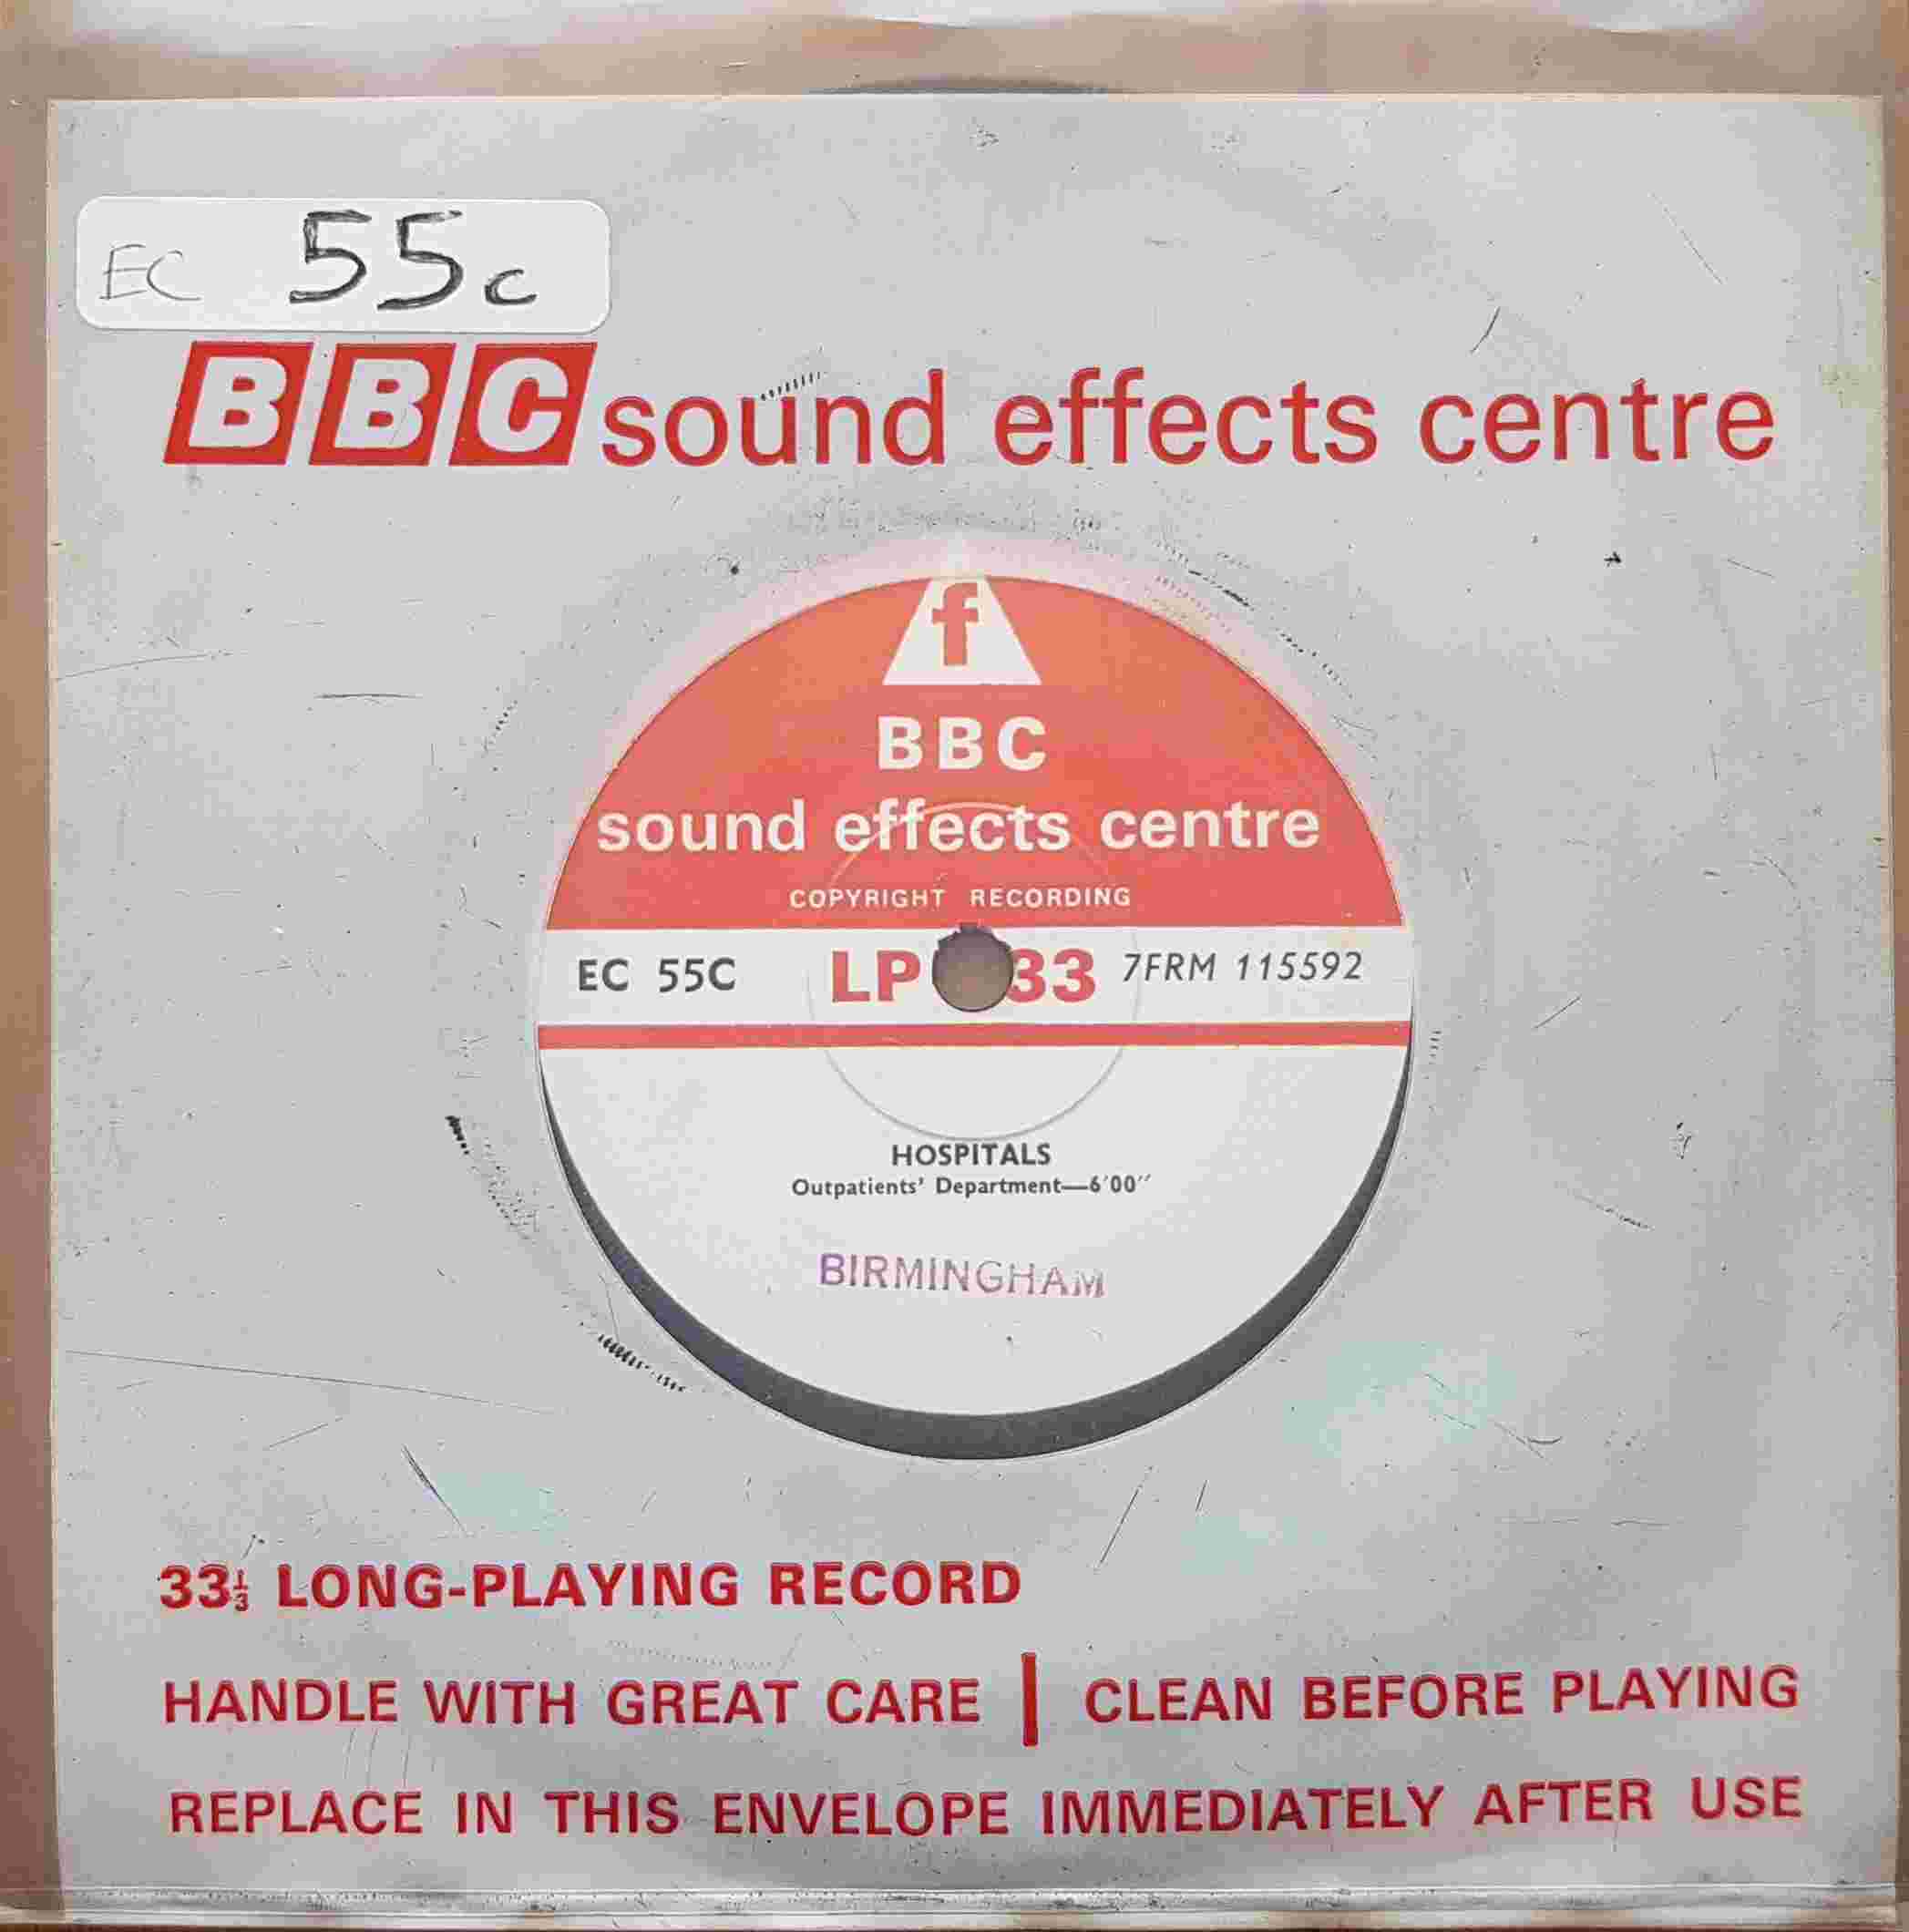 Picture of EC 55C Hospitals by artist Not registered from the BBC singles - Records and Tapes library